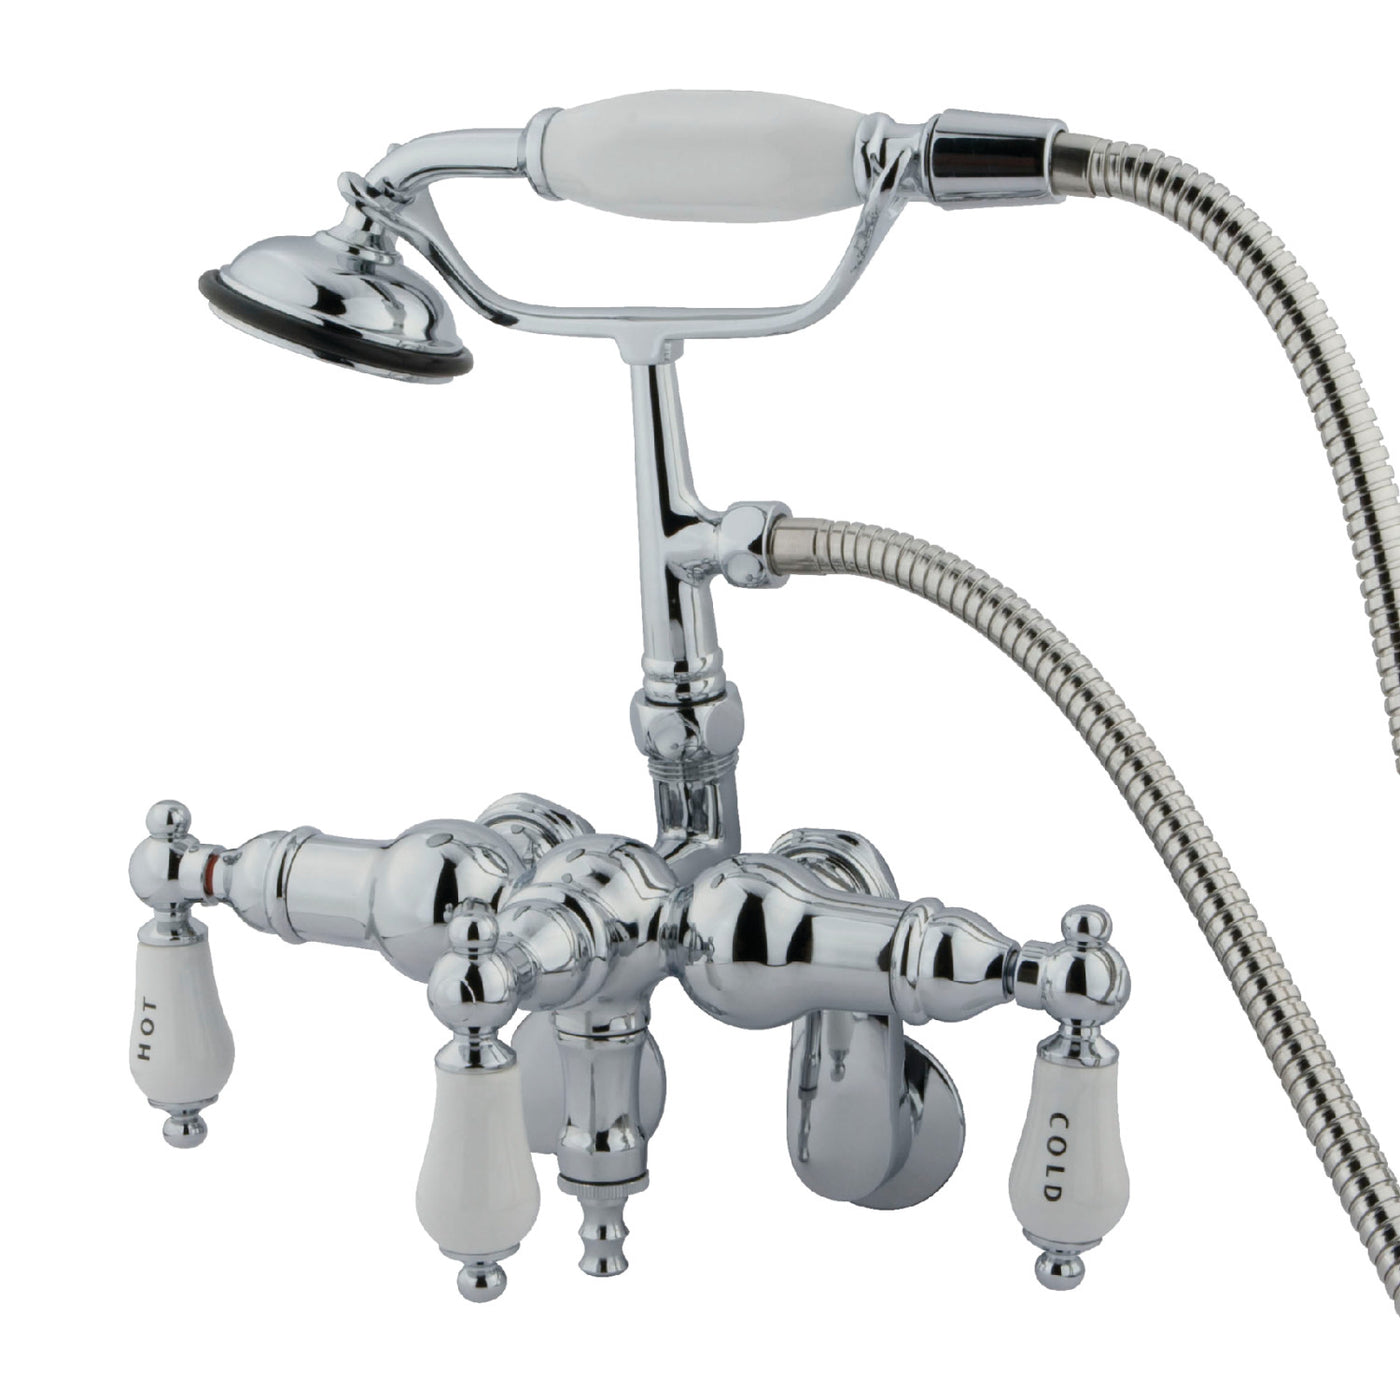 Elements of Design DT4201CL Adjustable Center Wall Mount Tub Faucet with Hand Shower, Polished Chrome